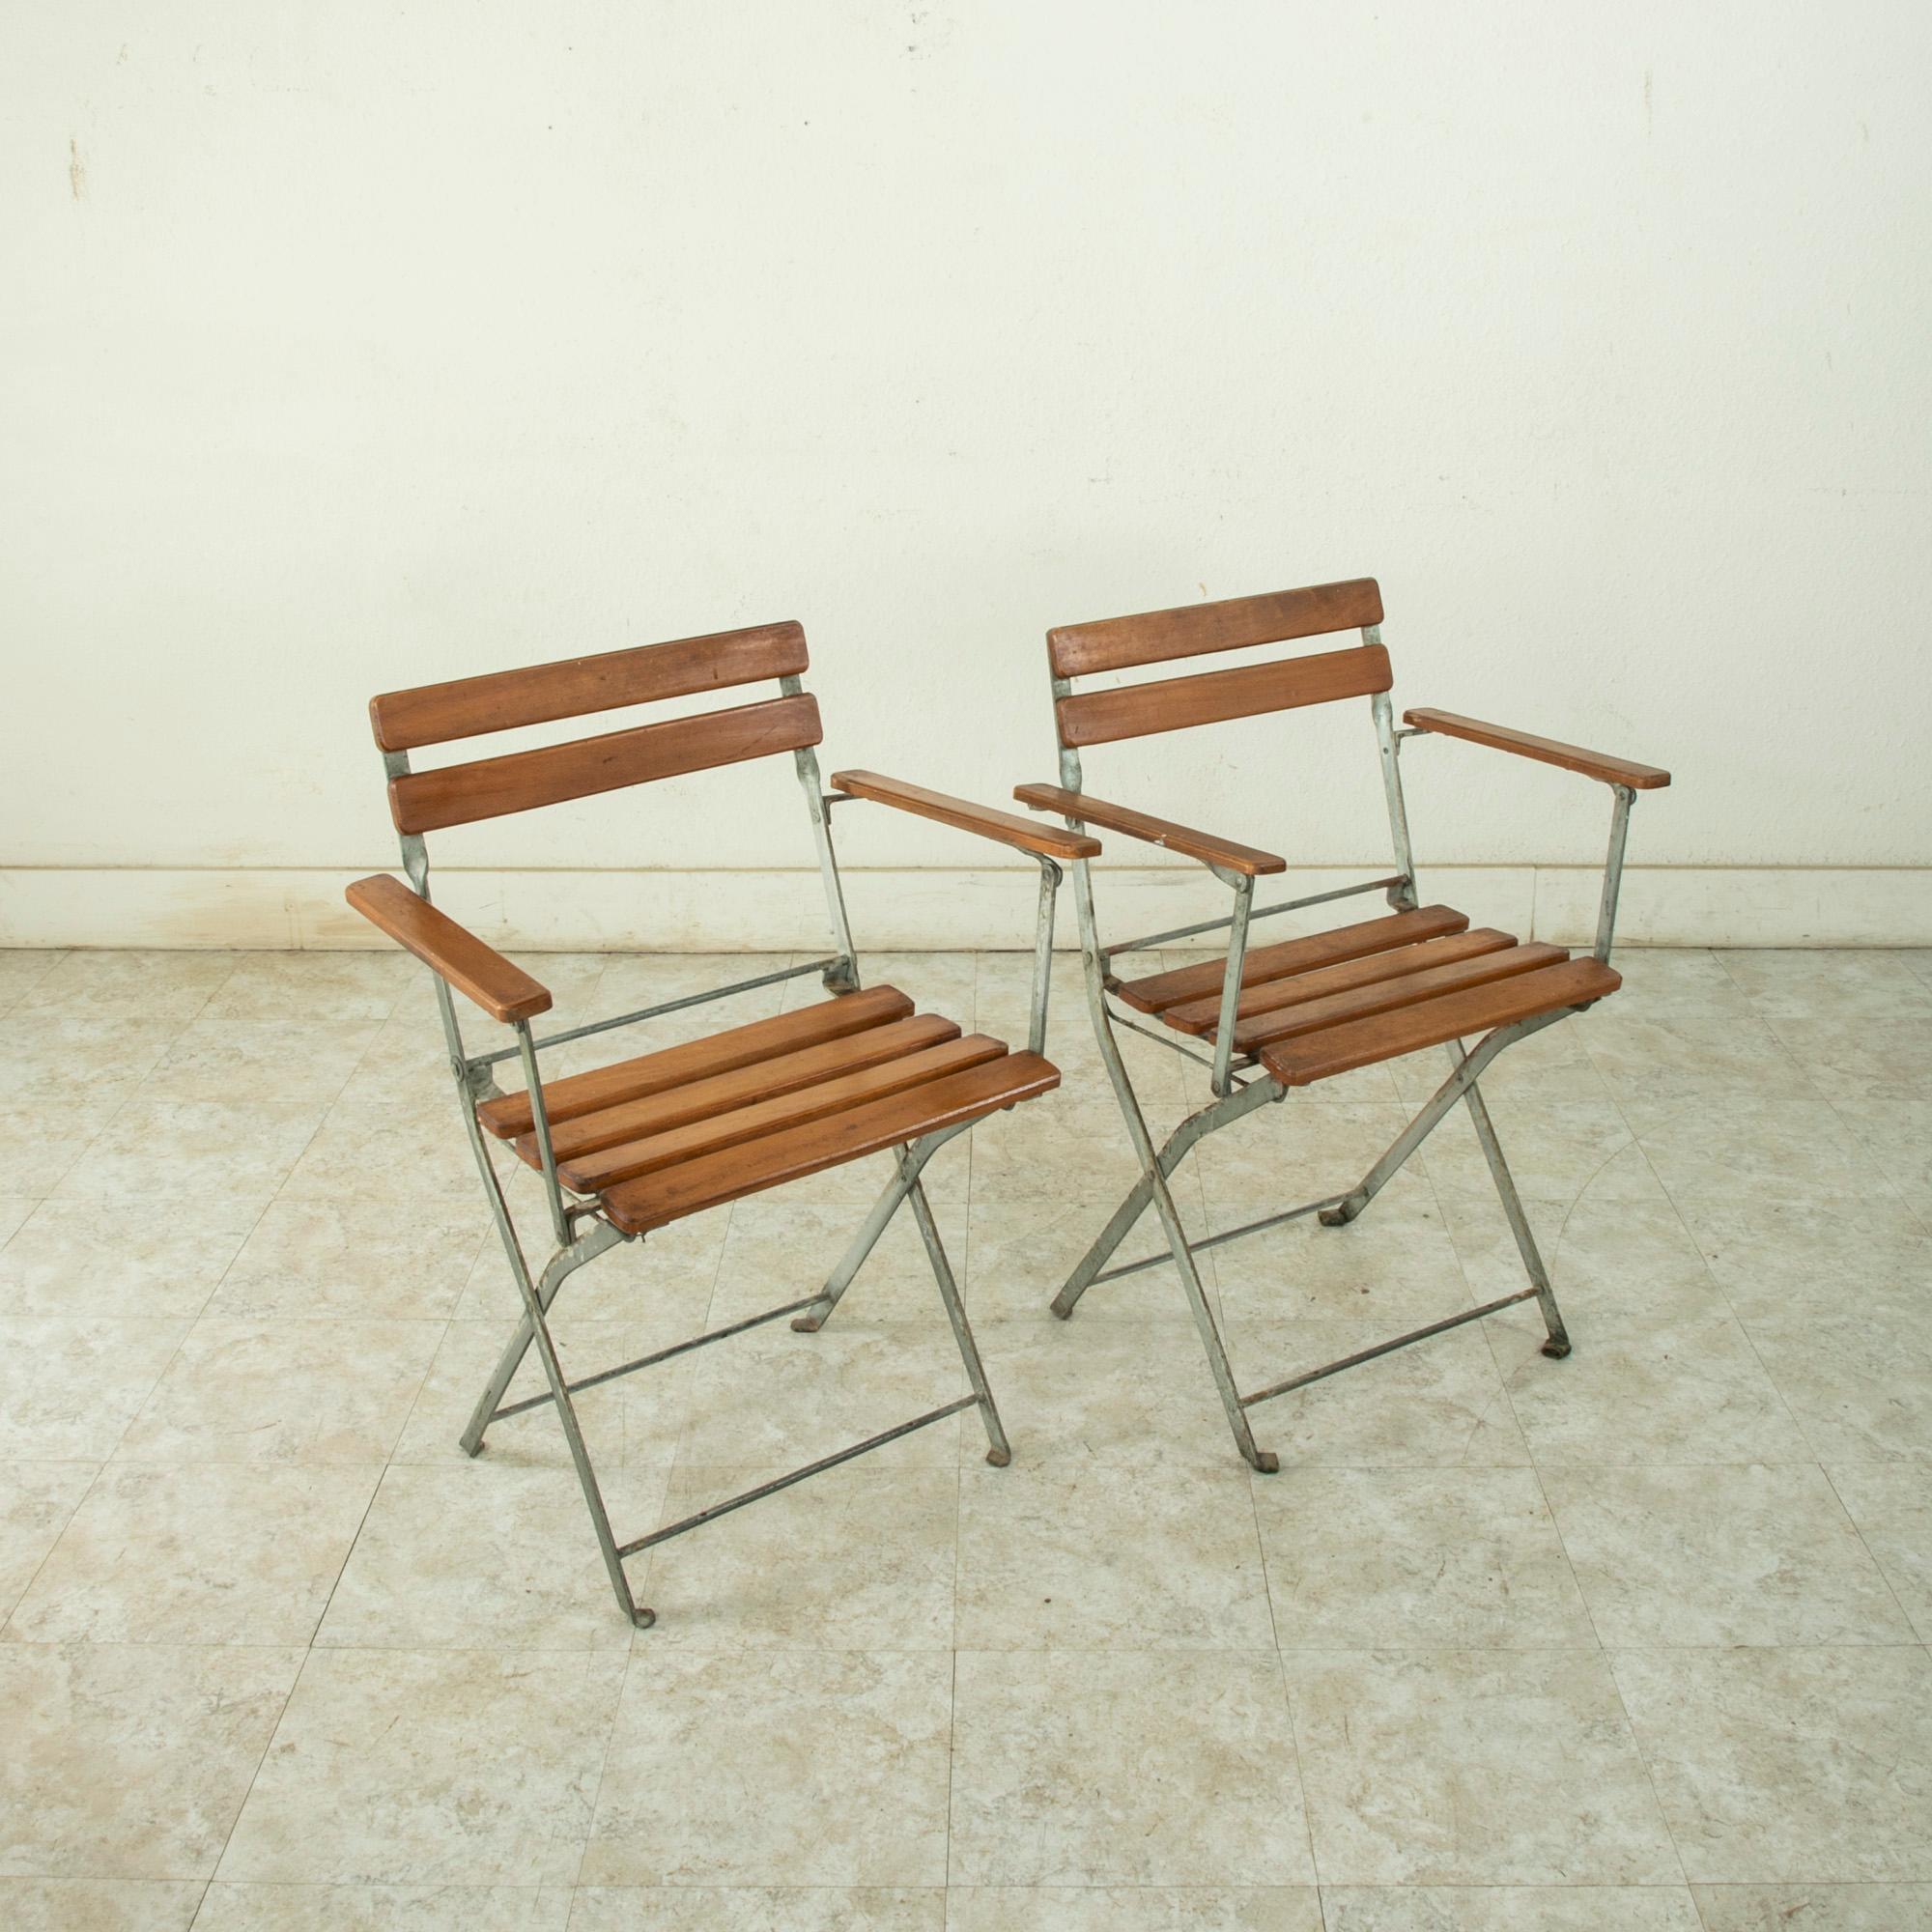 Found in the spa town of Bagnoles de l'Orne in the region of Normandy, France, this pair of mid-century metal bistro armchairs features wooden slats on the seat, seatback, and arms. These chairs fold flat for easier storing. An ideal pair for a